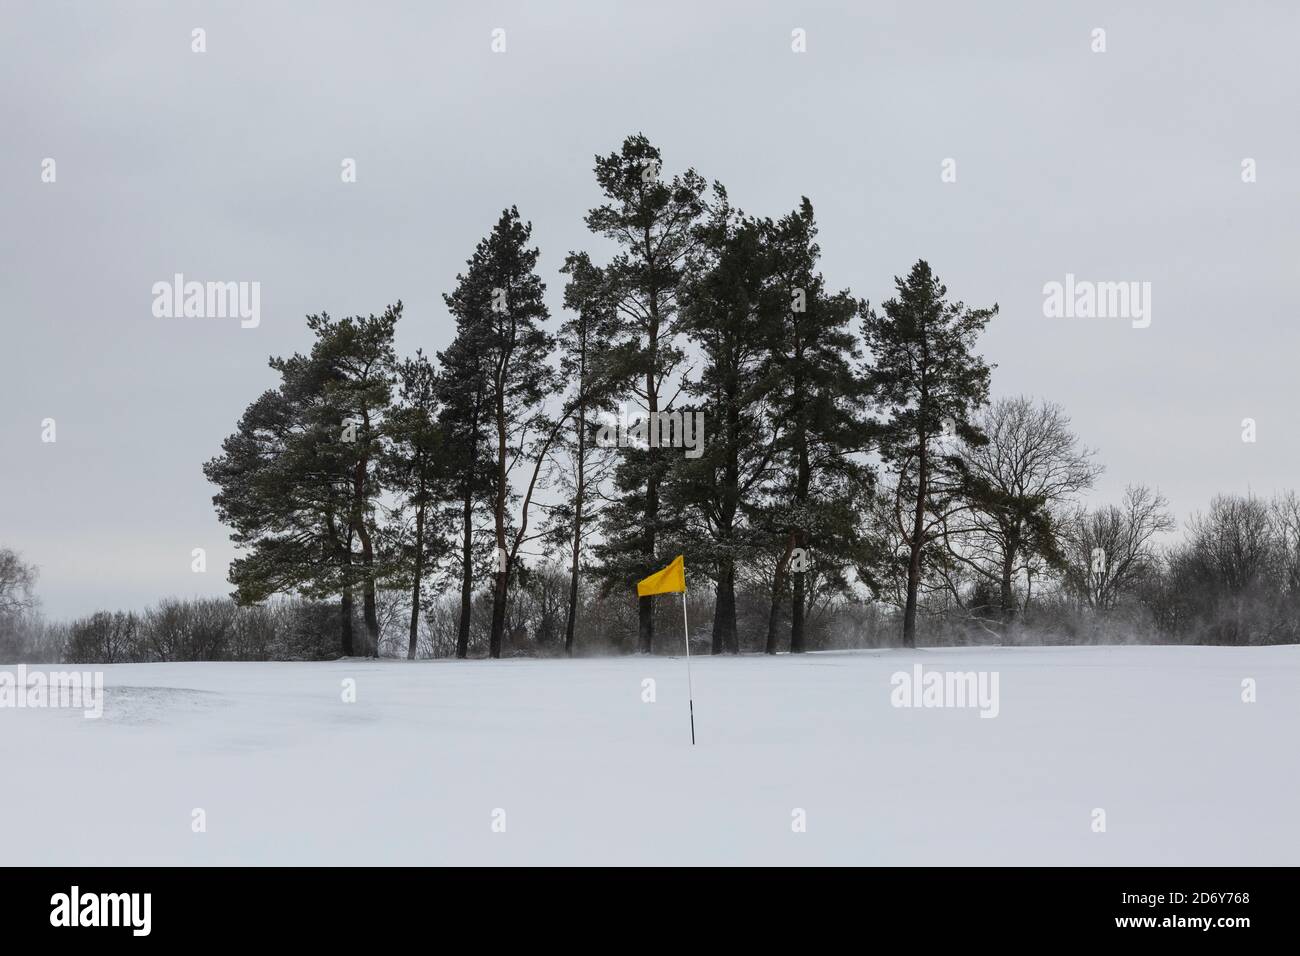 Yellow flag on a snow covered golf course Stock Photo